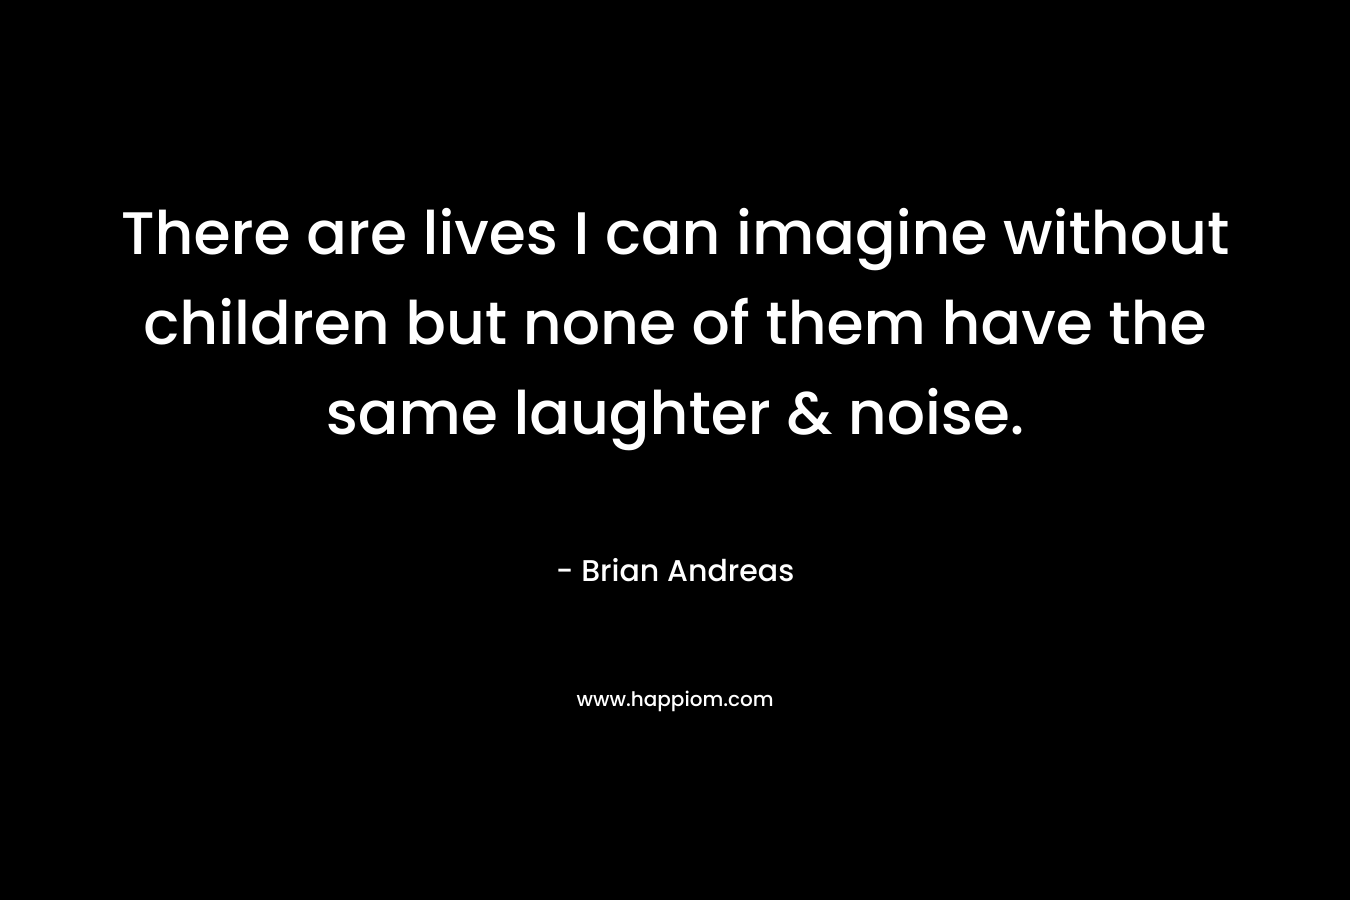 There are lives I can imagine without children but none of them have the same laughter & noise. – Brian Andreas